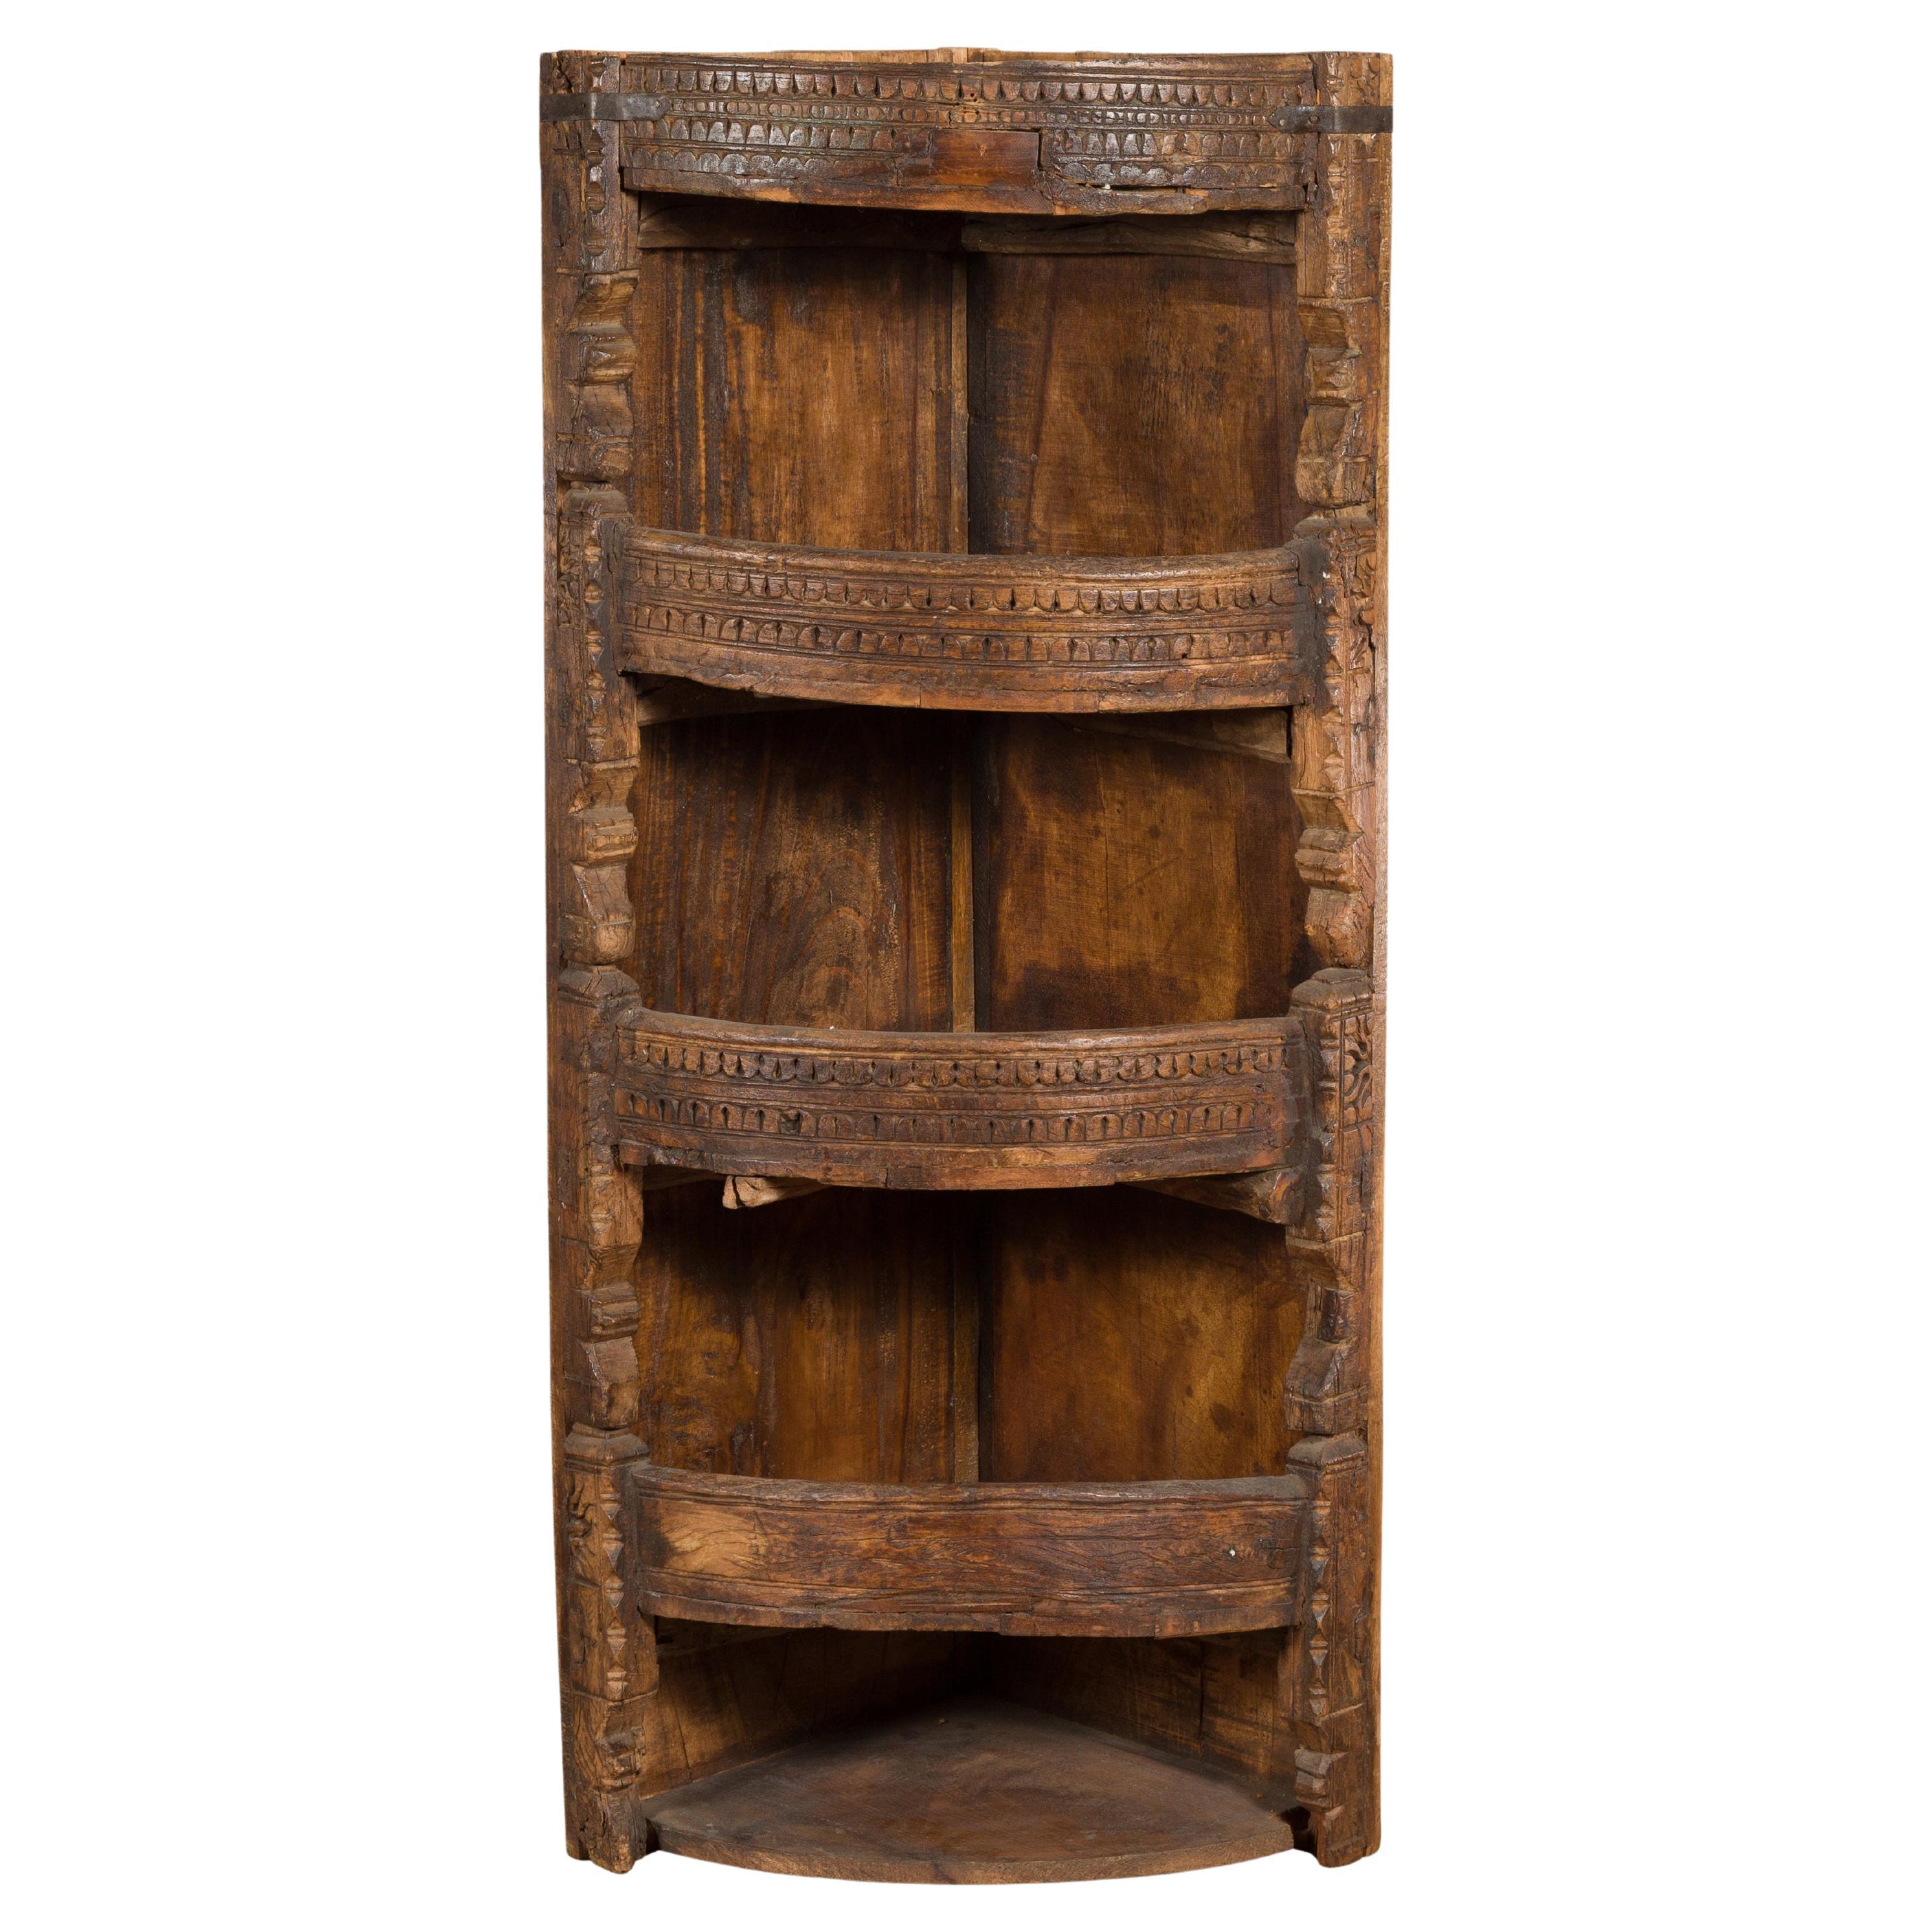 Rustic Indian 19th Century Corner Cabinet with Carved Motifs and Shelves For Sale